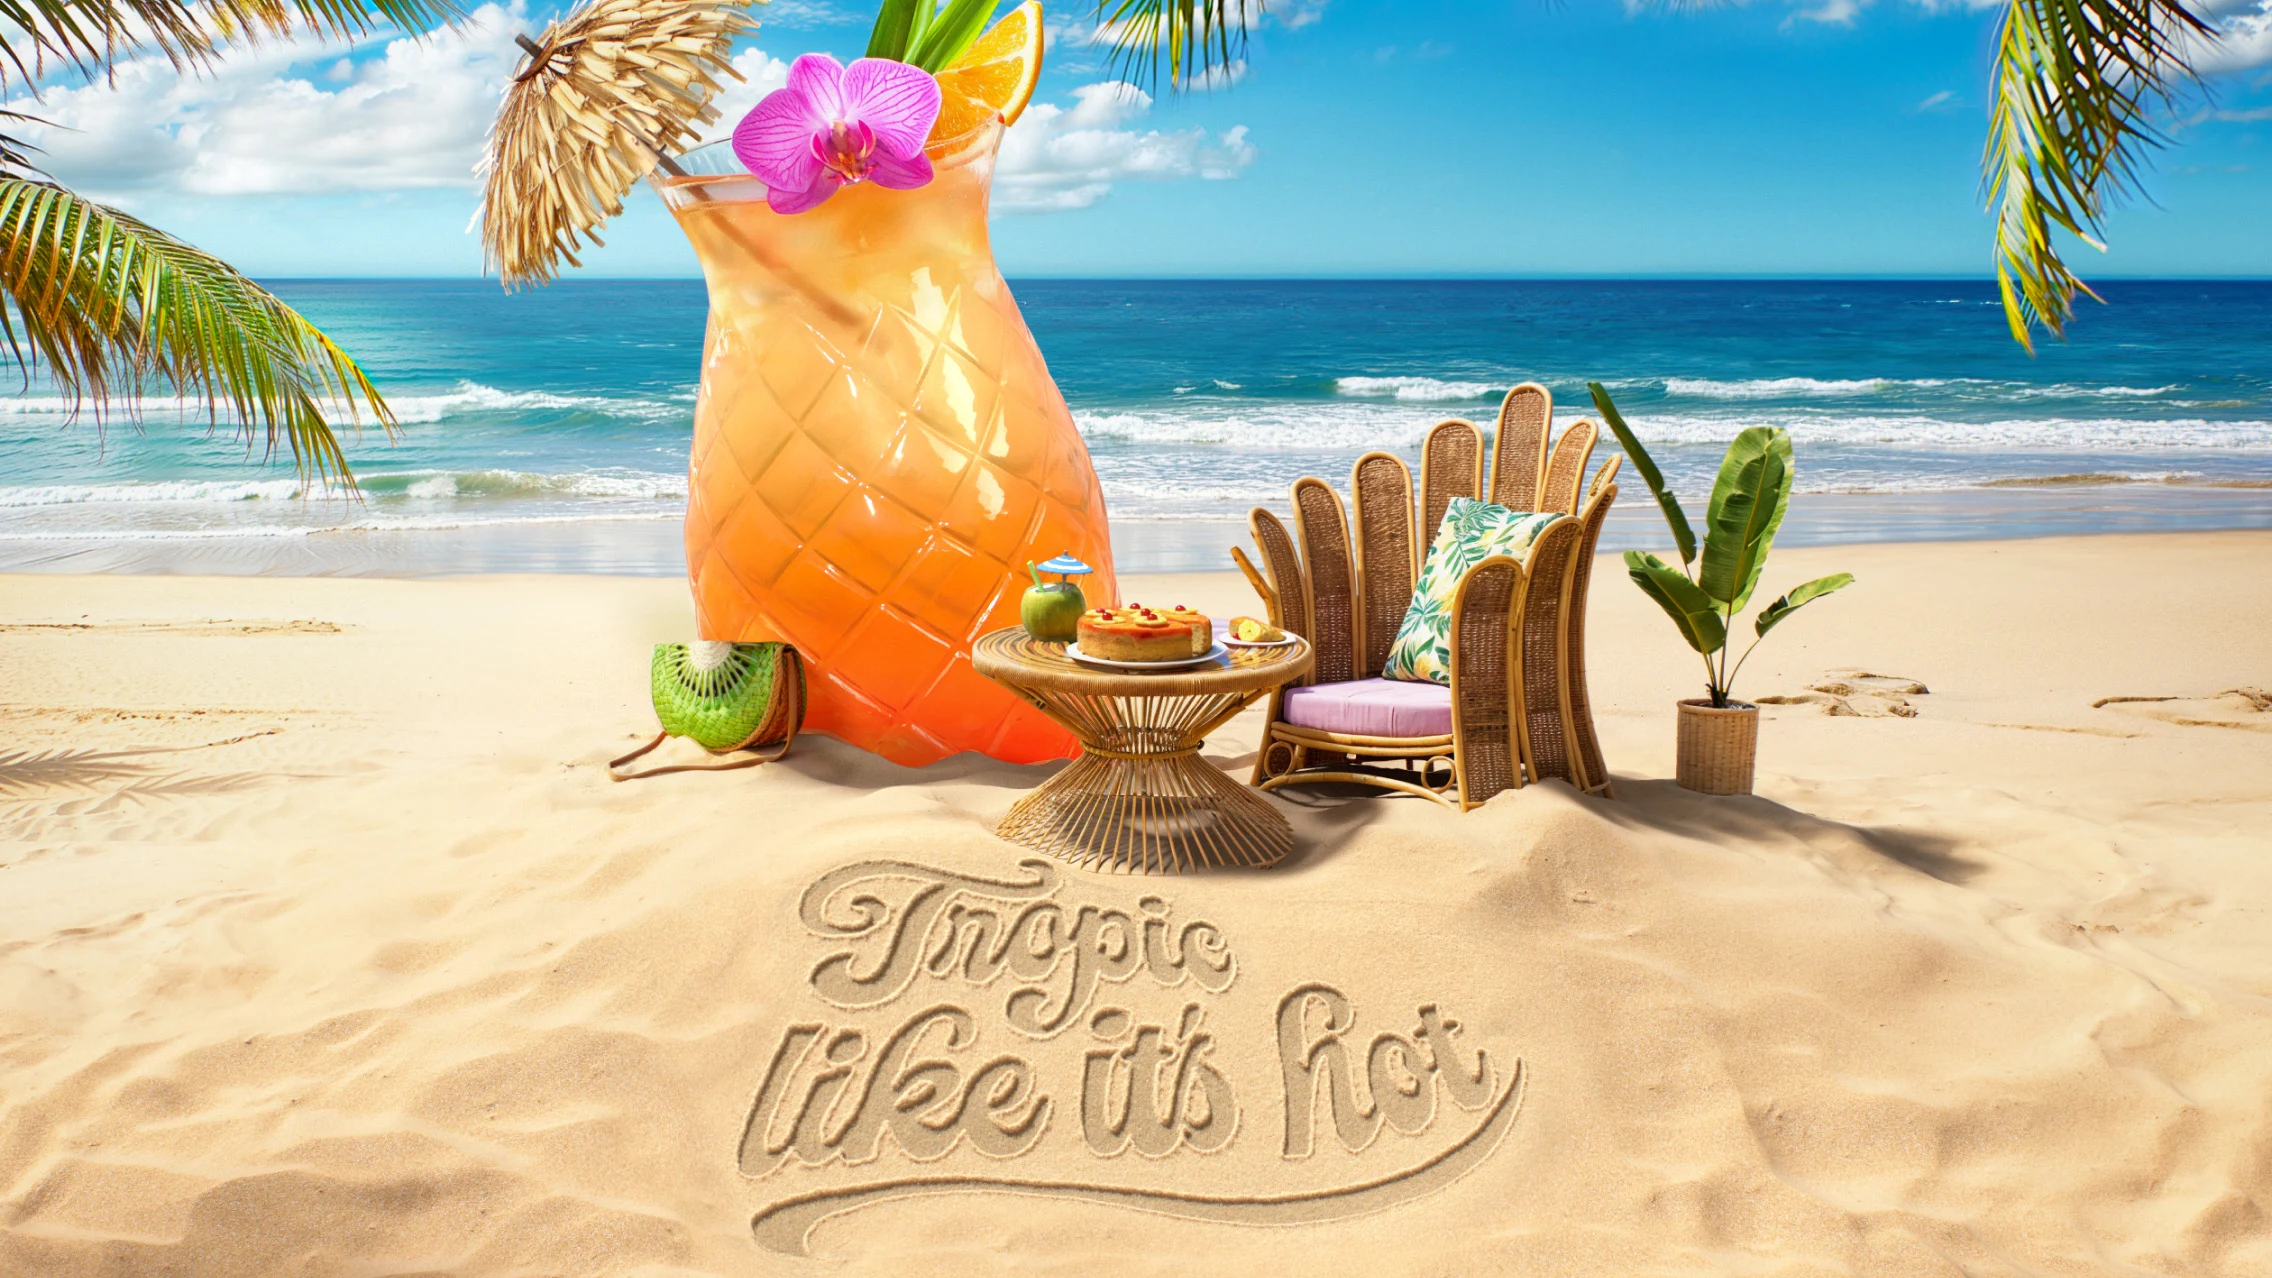 Life-sized tropical cocktail sits atop sandy shore in front of a bright blue ocean next to a rattan table and chair and green plants. “Tropic Like It’s Hot” is written in the sand in cursive font.